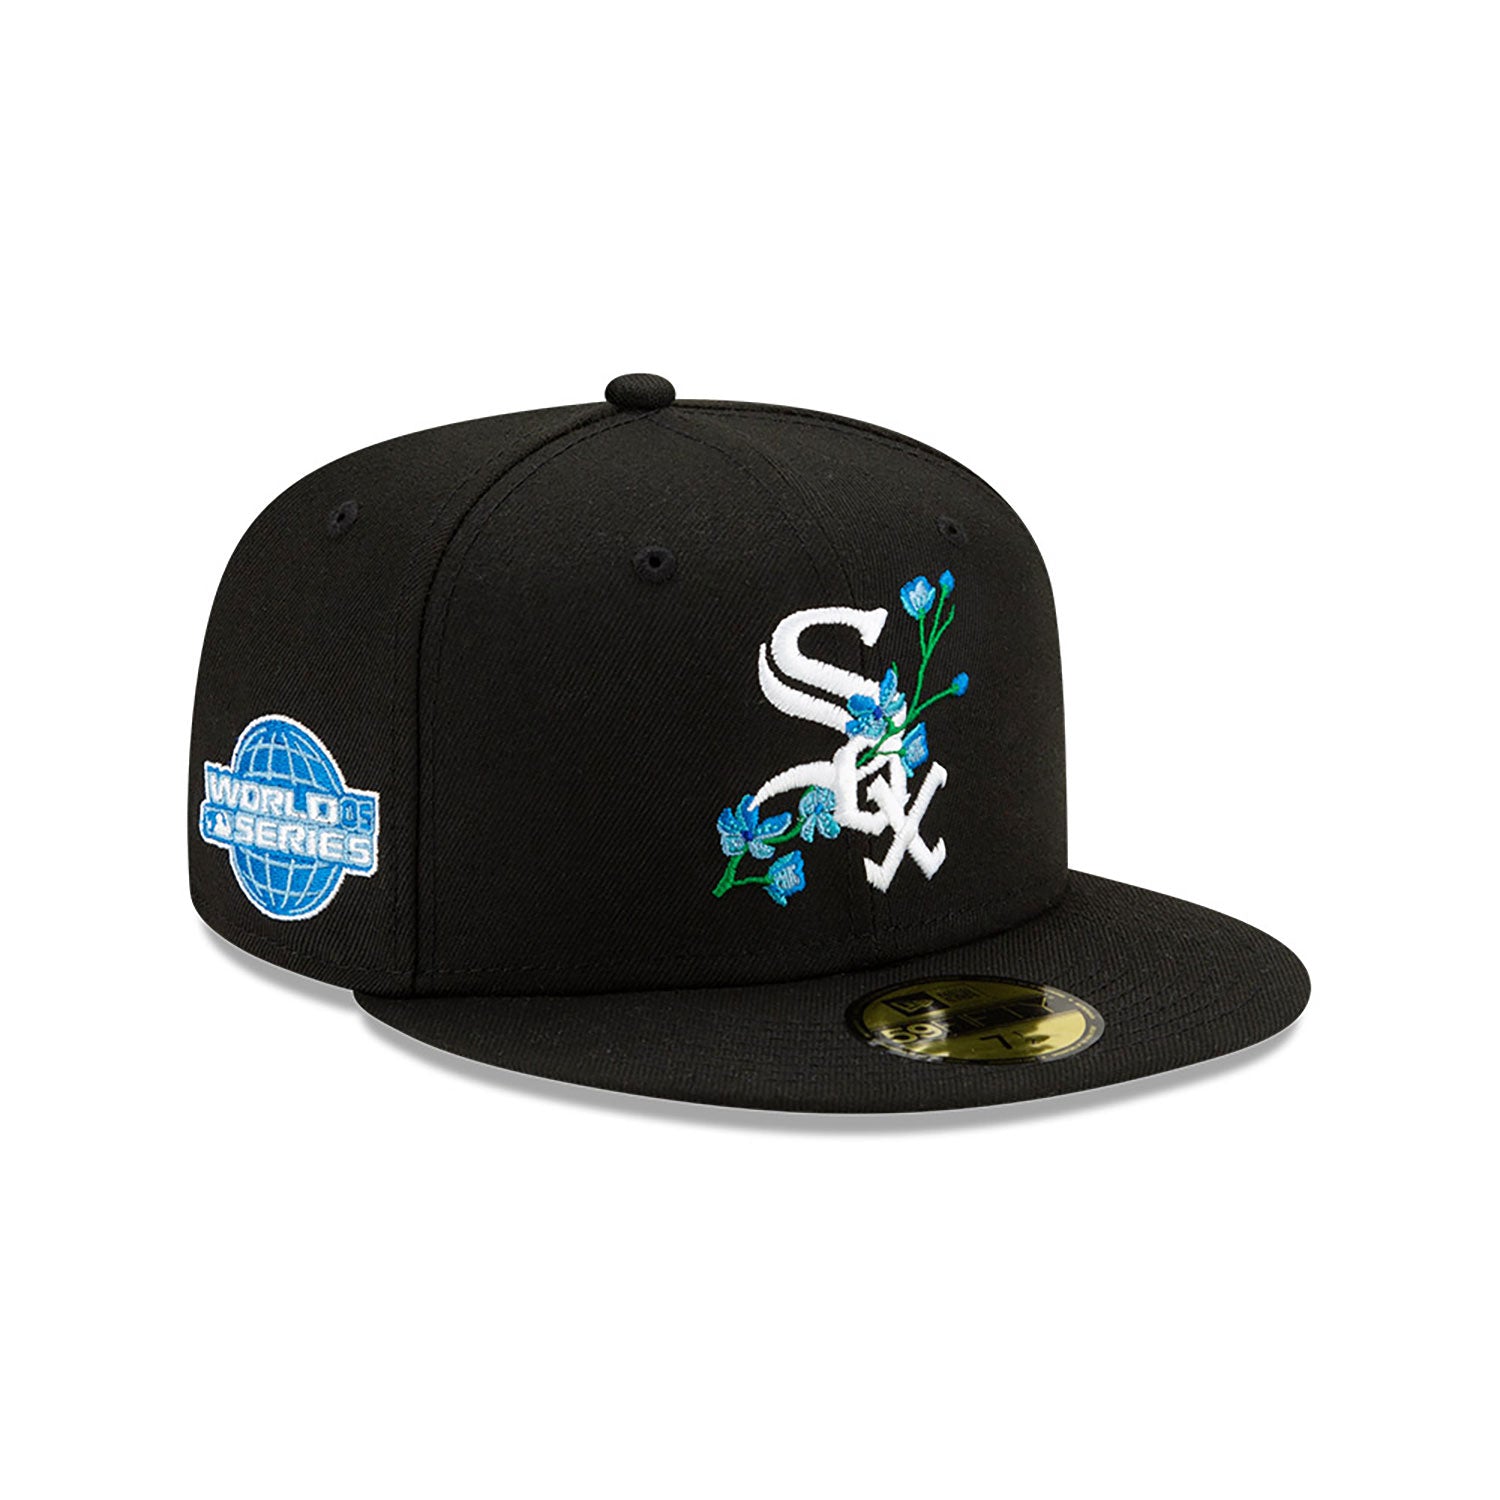 Chicago White Sox on X: 𝗦𝗼𝘂𝘁𝗵𝘀𝗶𝗱𝗲 𝗦𝘄𝗮𝗴. A look built for you,  by you.  / X